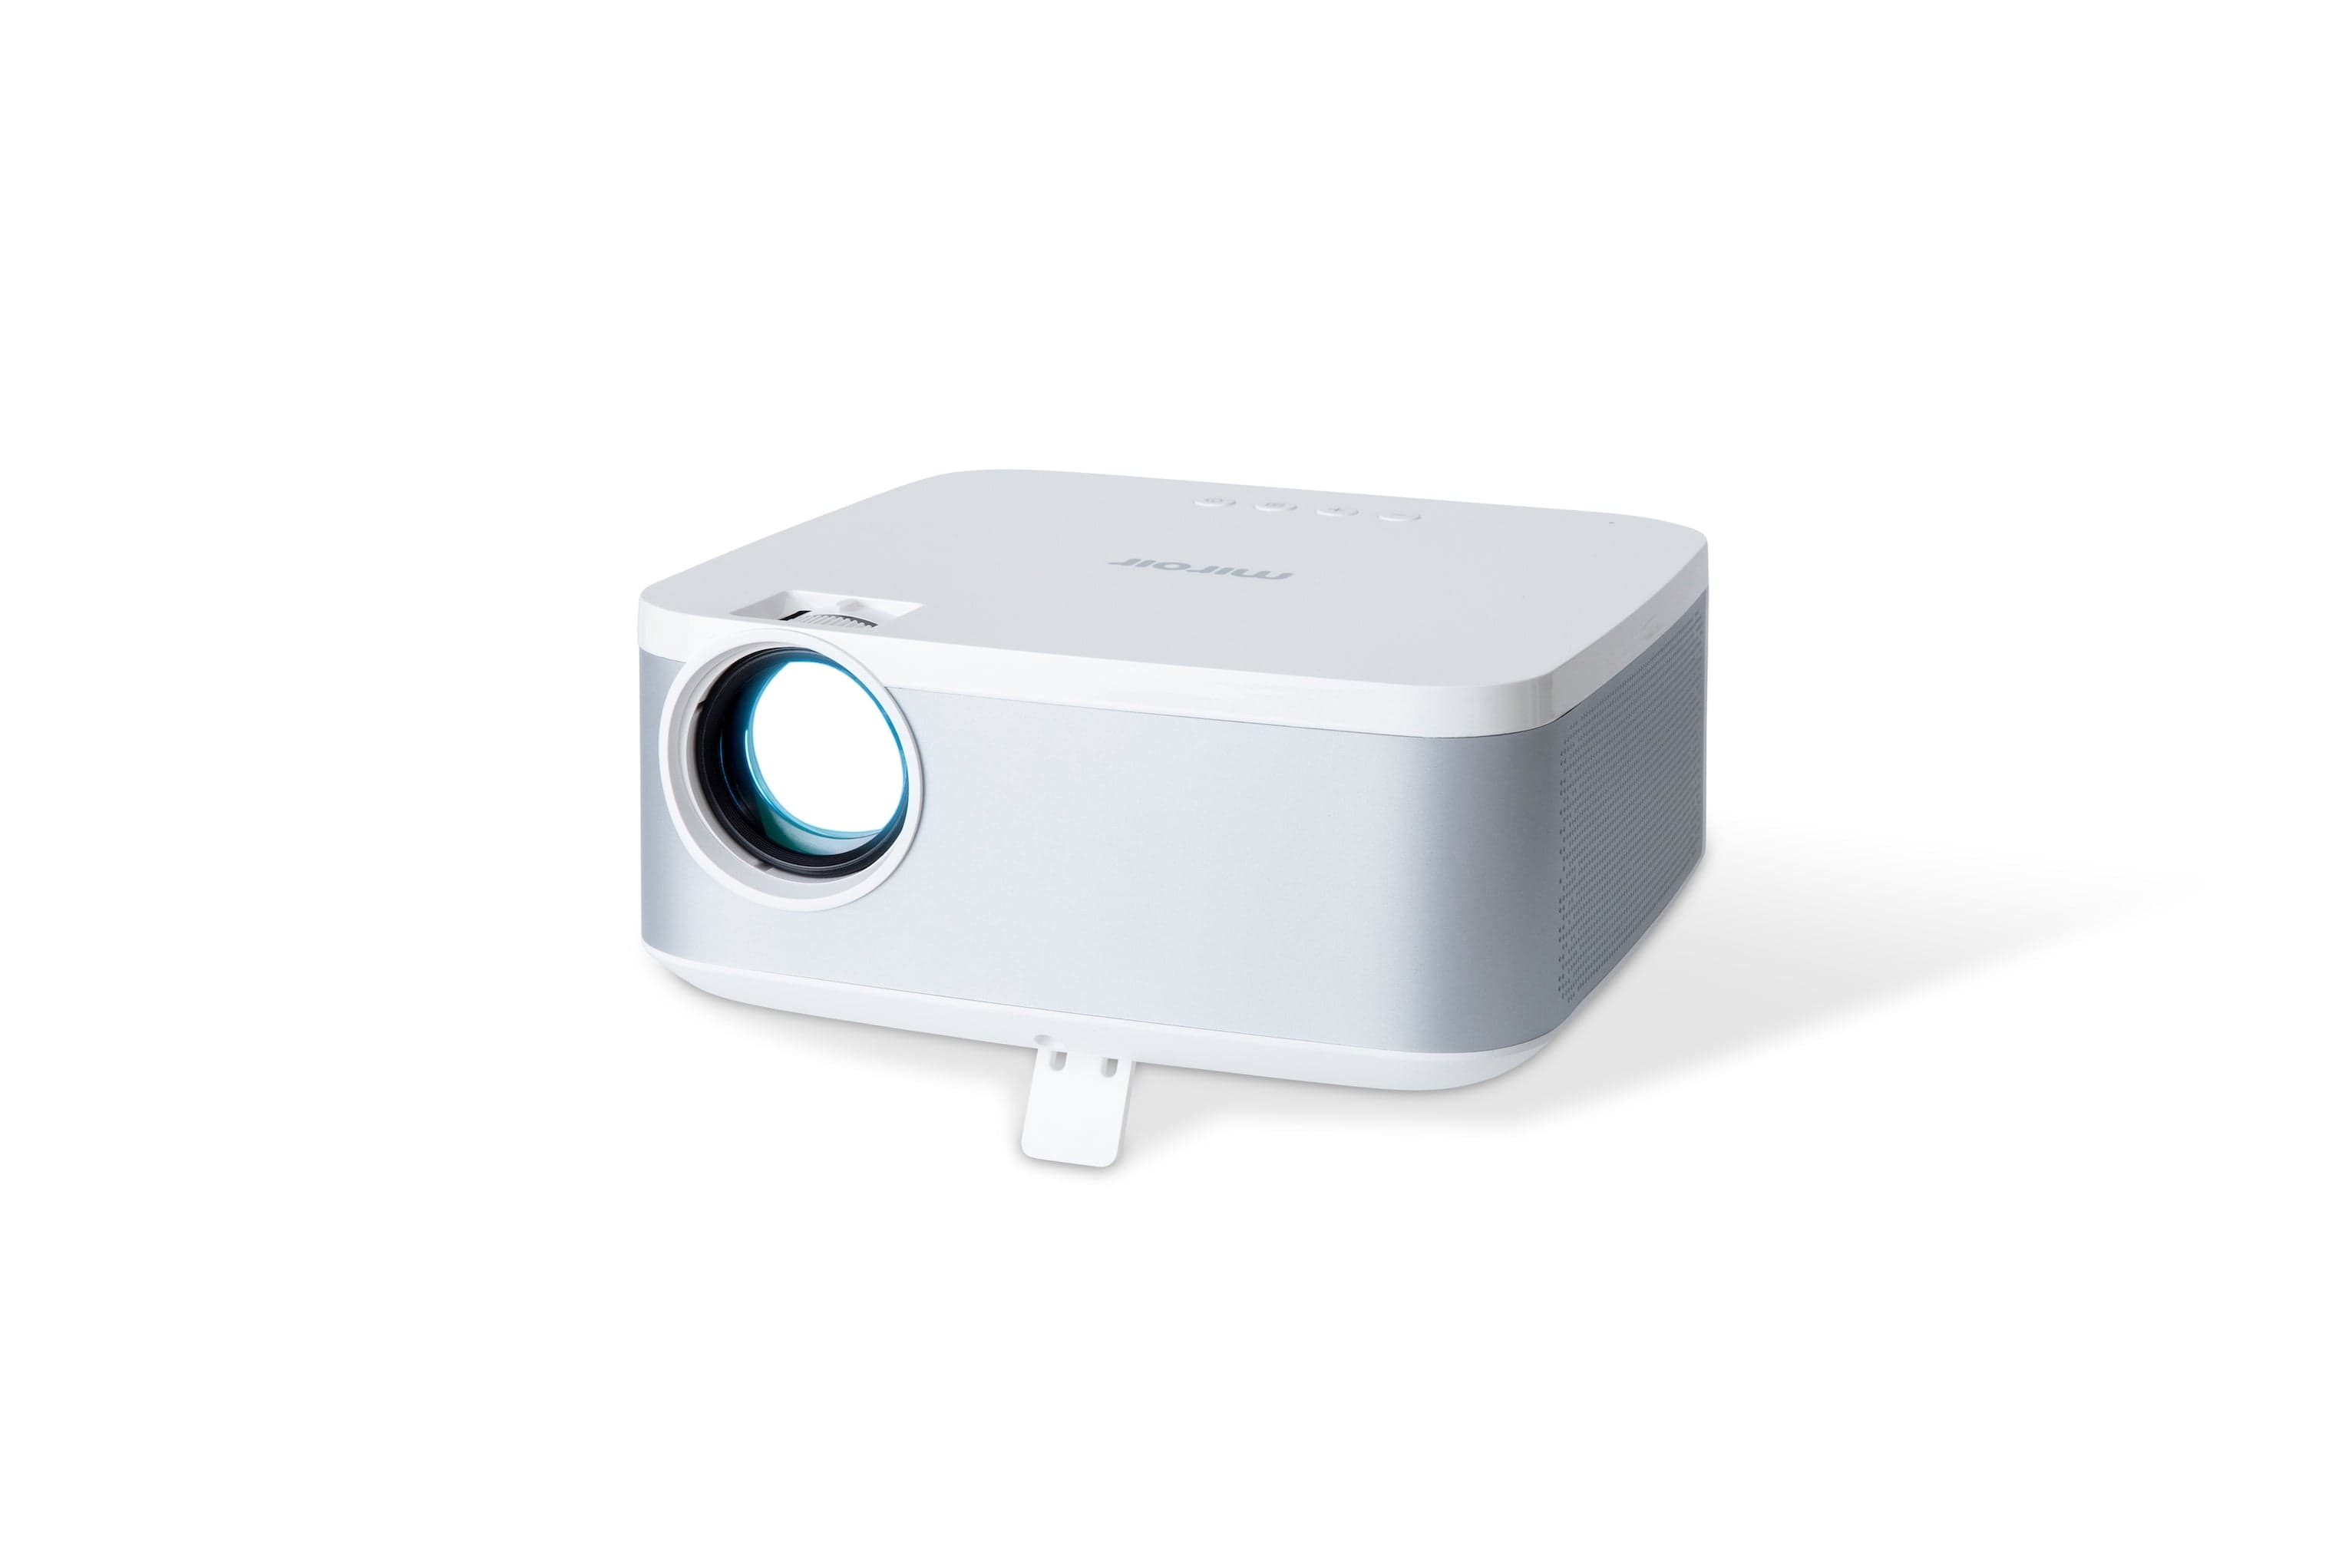 PHILIPS Android TV Projector with Apps and 5G WiFi Bluetooth - Smart  Projector